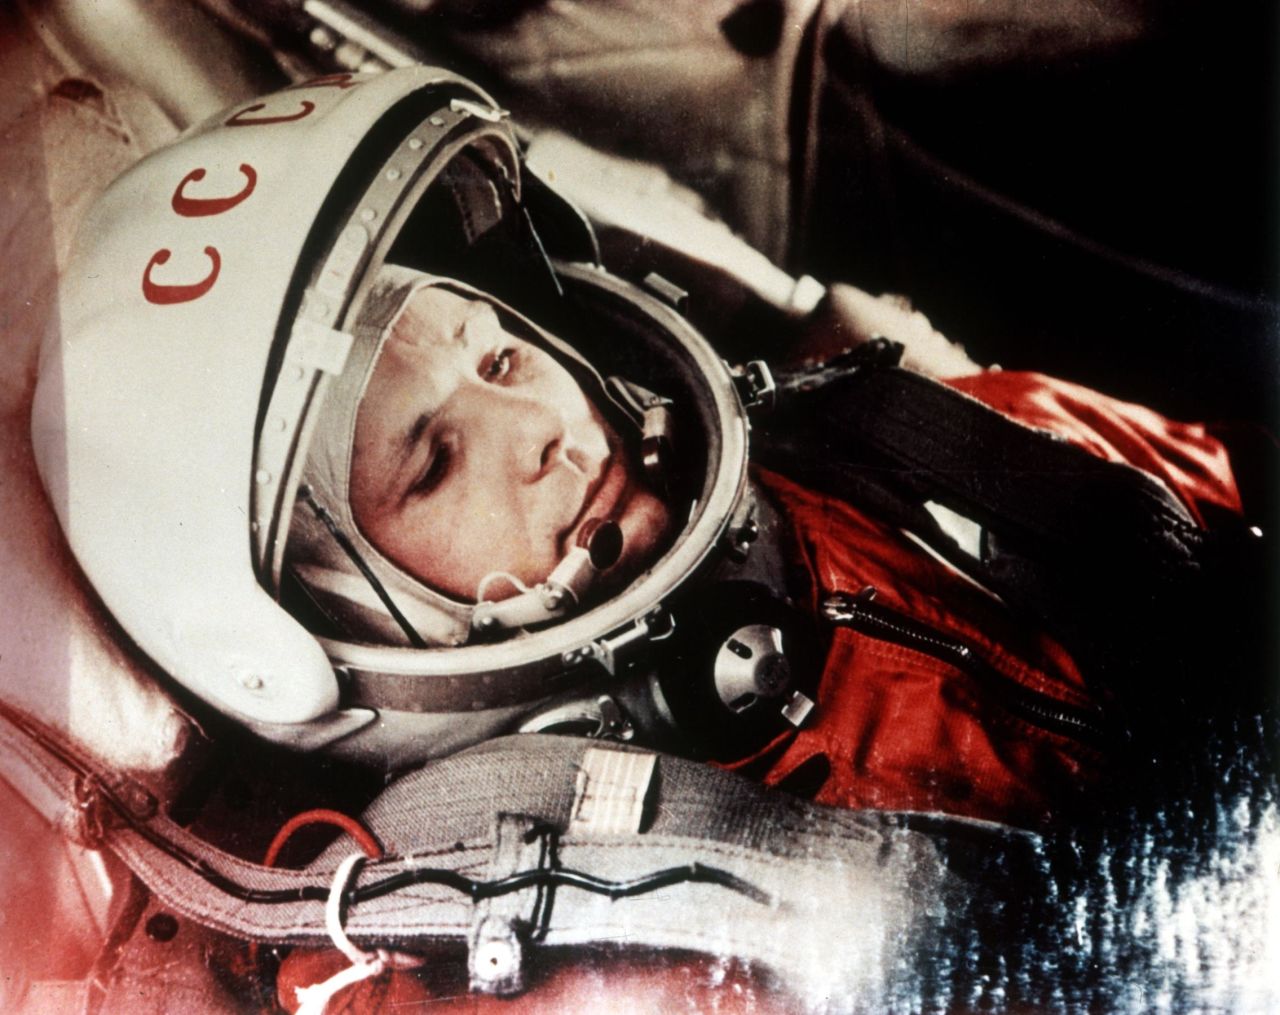 On April 12, 1961, Soviet cosmonaut Yuri Gagarin circled the Earth aboard a spacecraft called Vostok 1. After parachuting from the craft near the Russian village of Smelovka, Gagarin landed a hero — and a major embarrassment for the United States, already stung by the Soviet first-in-the-race launch of the Sputnik 1 satellite four years earlier.